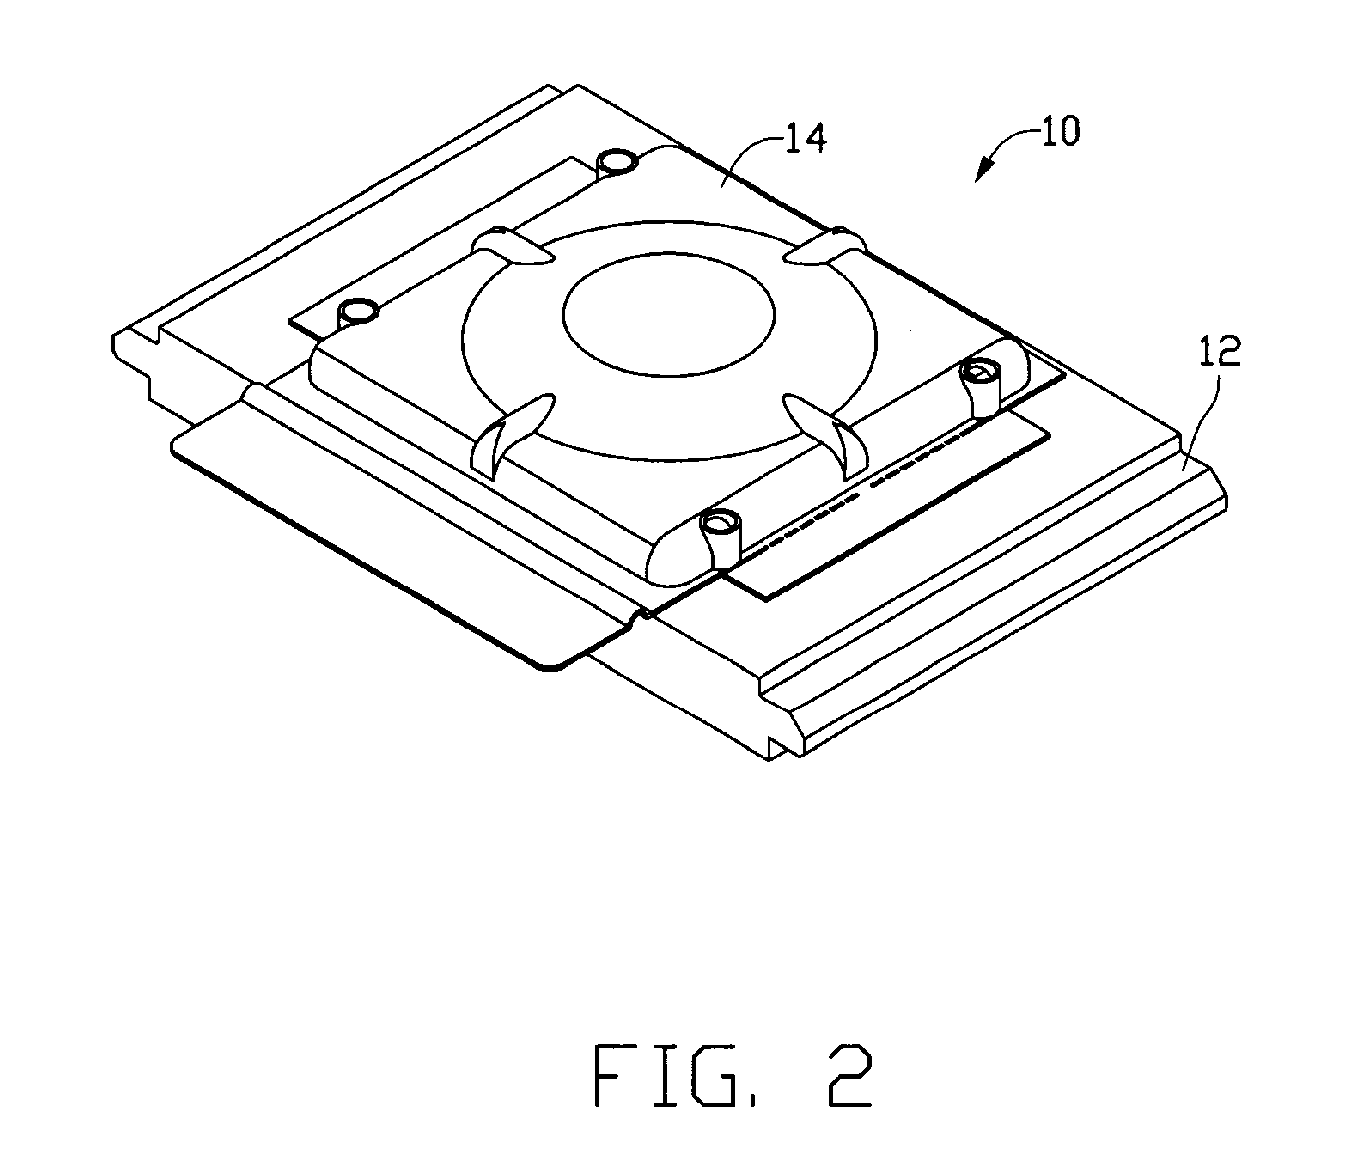 Grease protecting apparatus for heat sink